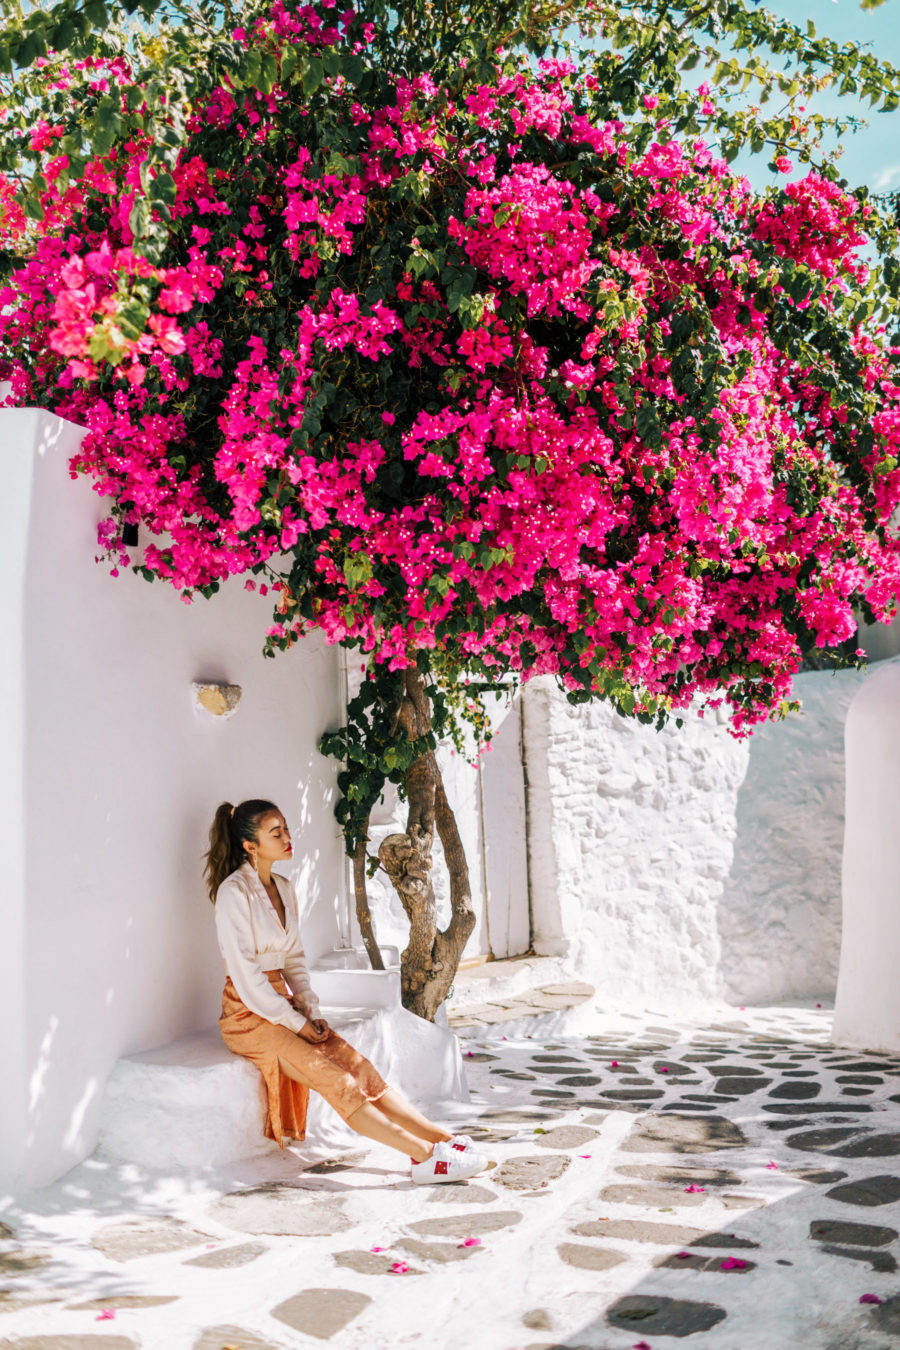 Top 5 Travel Destinations in the Summer - Most Instagrammable Spot In Santorini // NotJessFashion.com